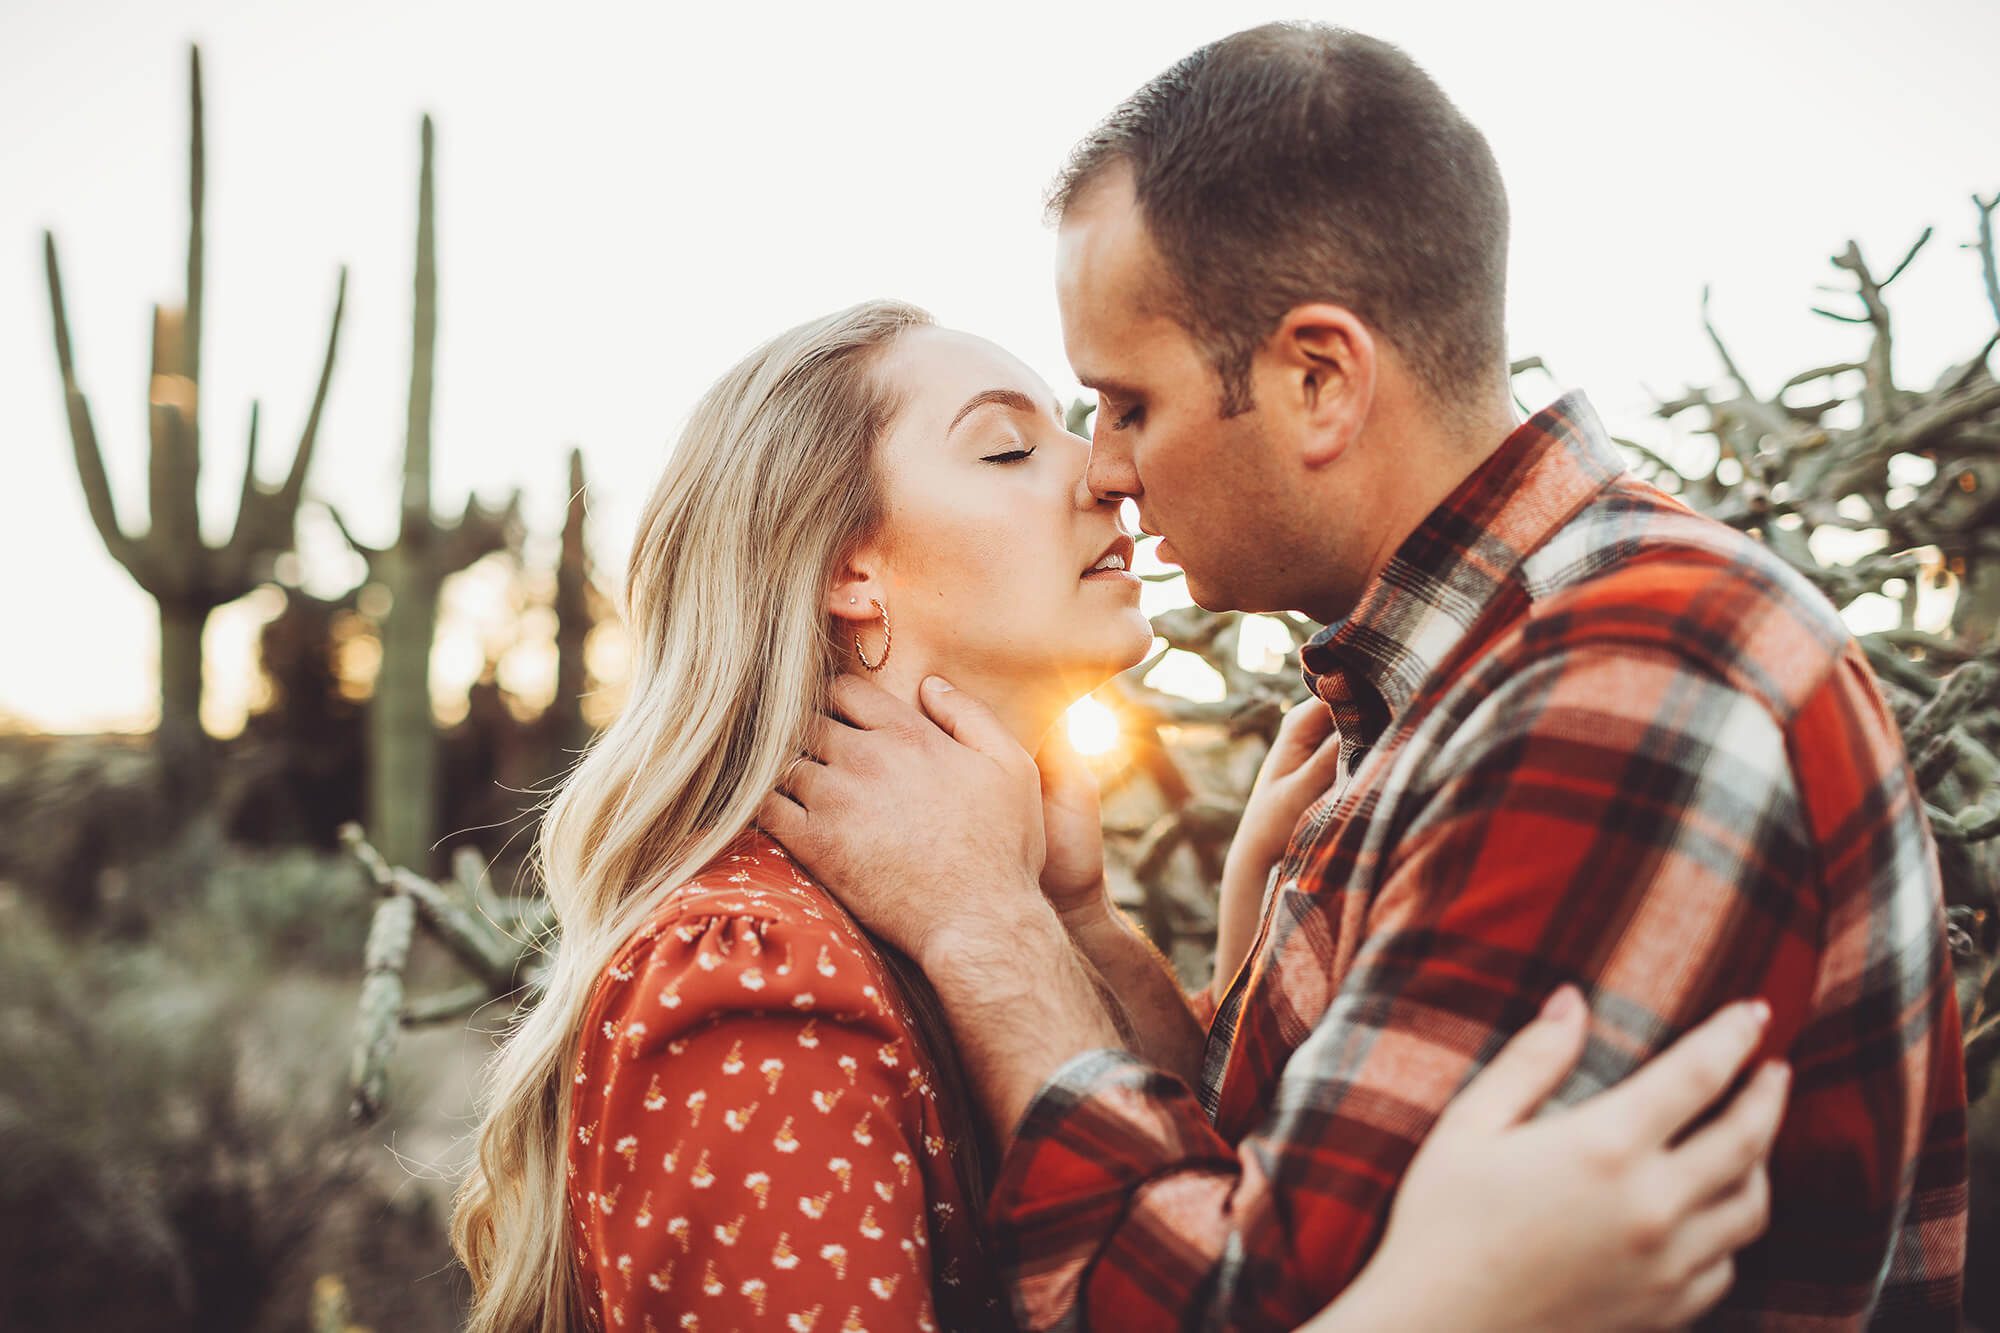 A romantic sunset kiss for the Freeman's during their couple's session at Sabino Canyon